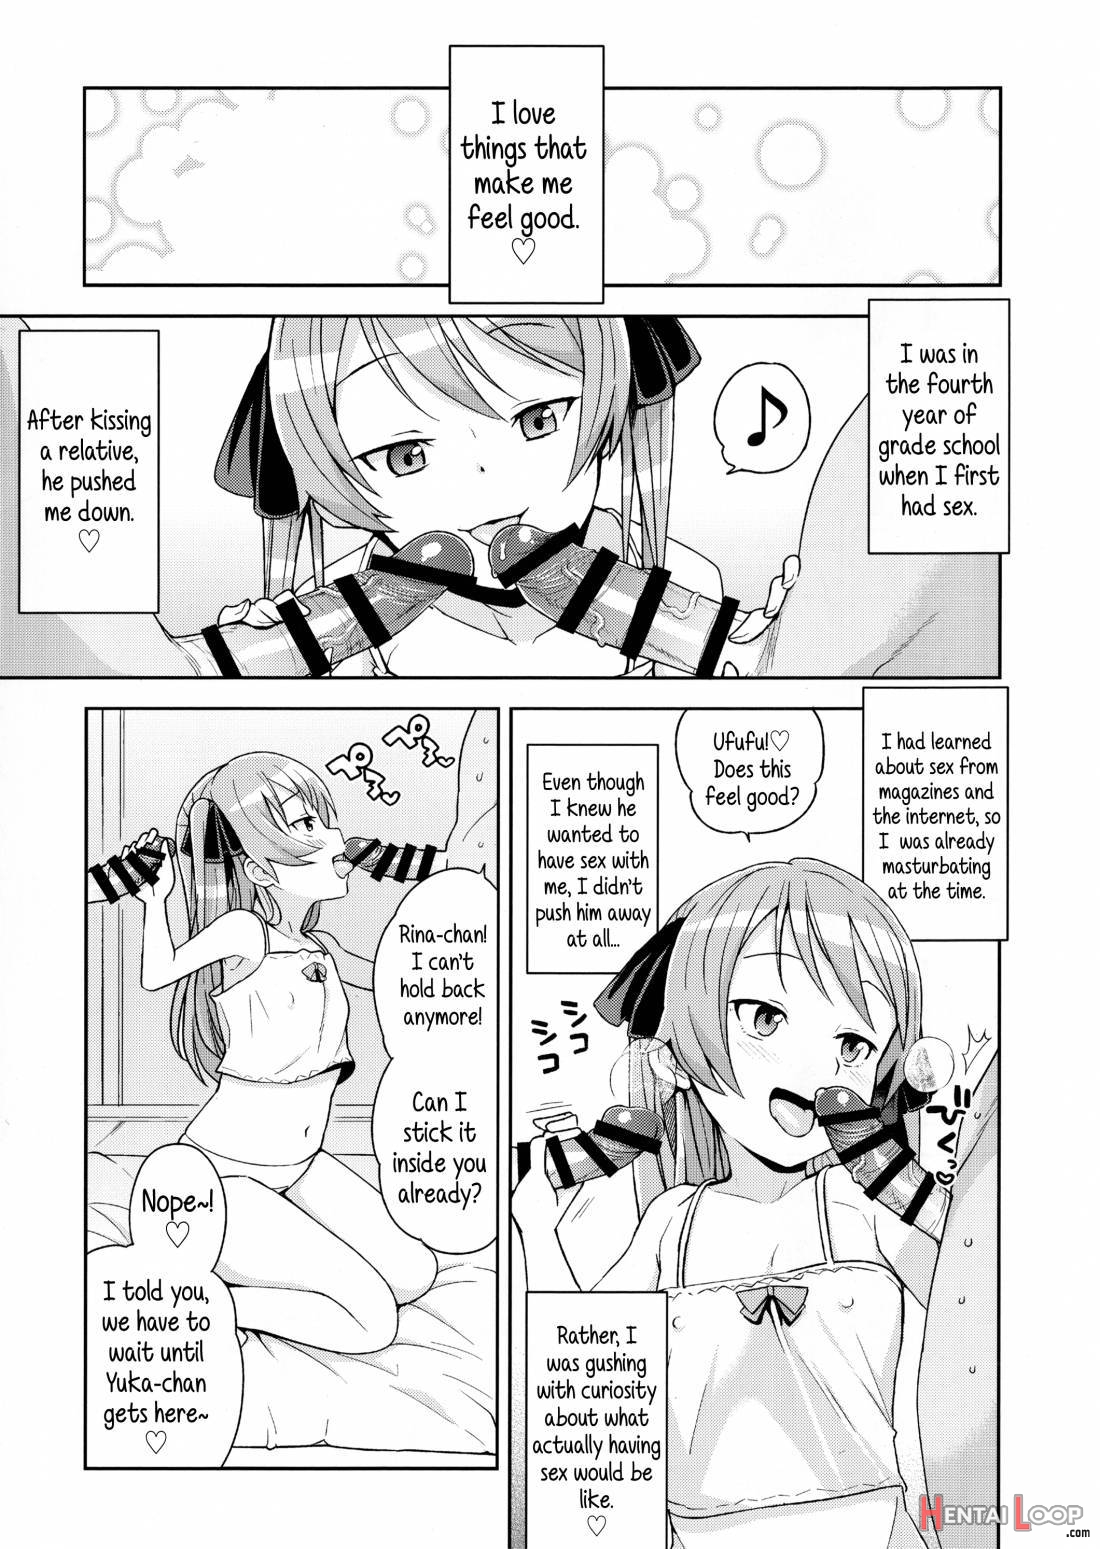 Page 1 of LITTLE BITCH PLANET (by Tamagoro) - Hentai doujinshi for free at  HentaiLoop